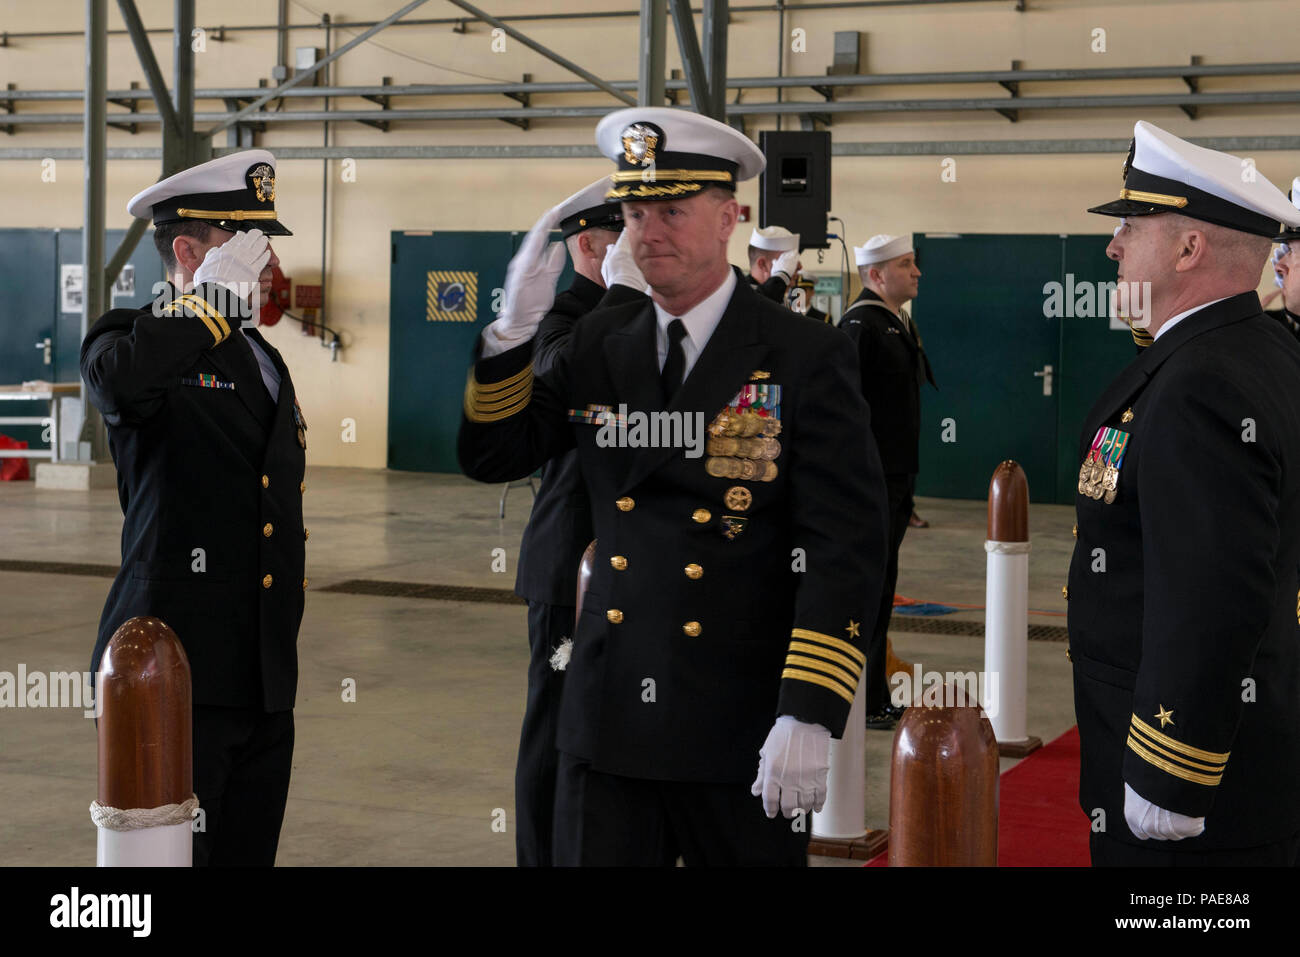 160324-N-UE250-042 NAPLES, Italy (March 24, 2016) Incoming Commodore, Capt. Jeffrey Wolstenholme arrives at the start of the Commander, Task Force 64 (CTF 64) command establishment ceremony aboard U.S. Naval Support Activity Naples March 24, 2016. CTF 64 is responsible for executing operational and tactical integrated air and missile defense, providing direct support for Aegis ballistic missile defense planning to Commander, U.S. Air Forces Europe and Commander, Allied Air Command. (U.S. Navy photo by Mass Communication Specialist 2nd Class Corey Hensley/Released) Stock Photo